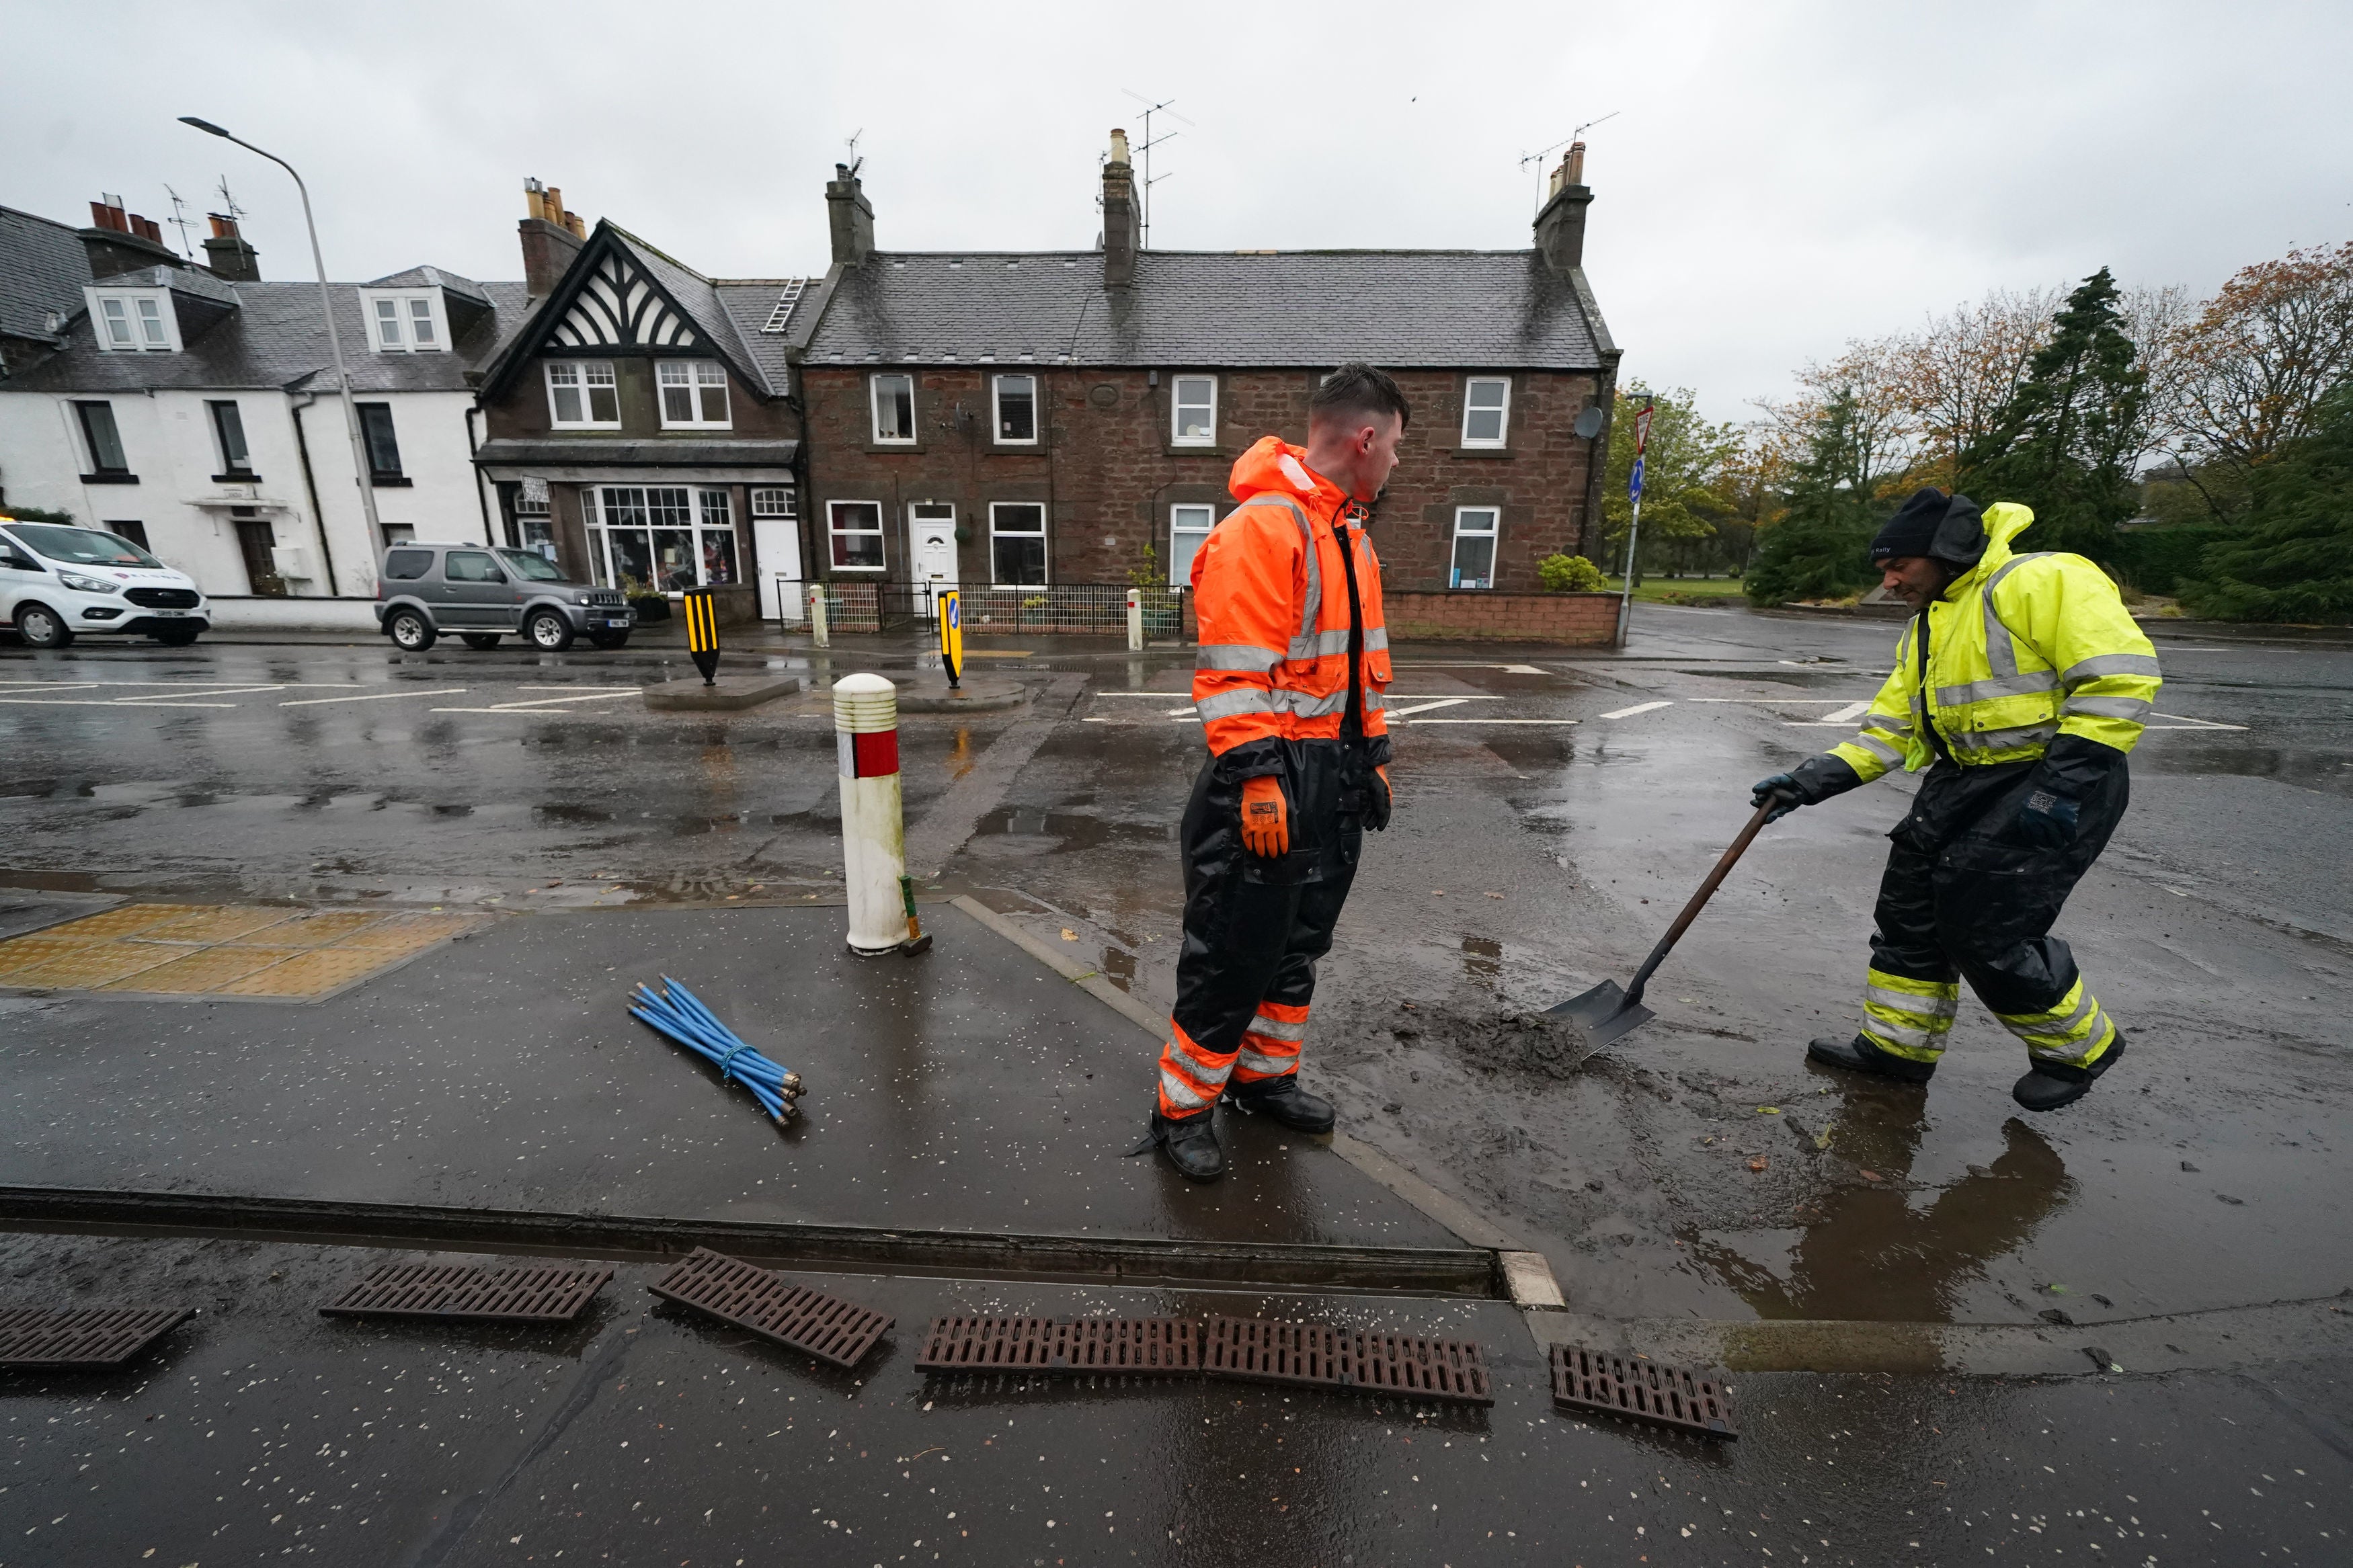 Workmen clear the drains in the village of Edzell, Scotland